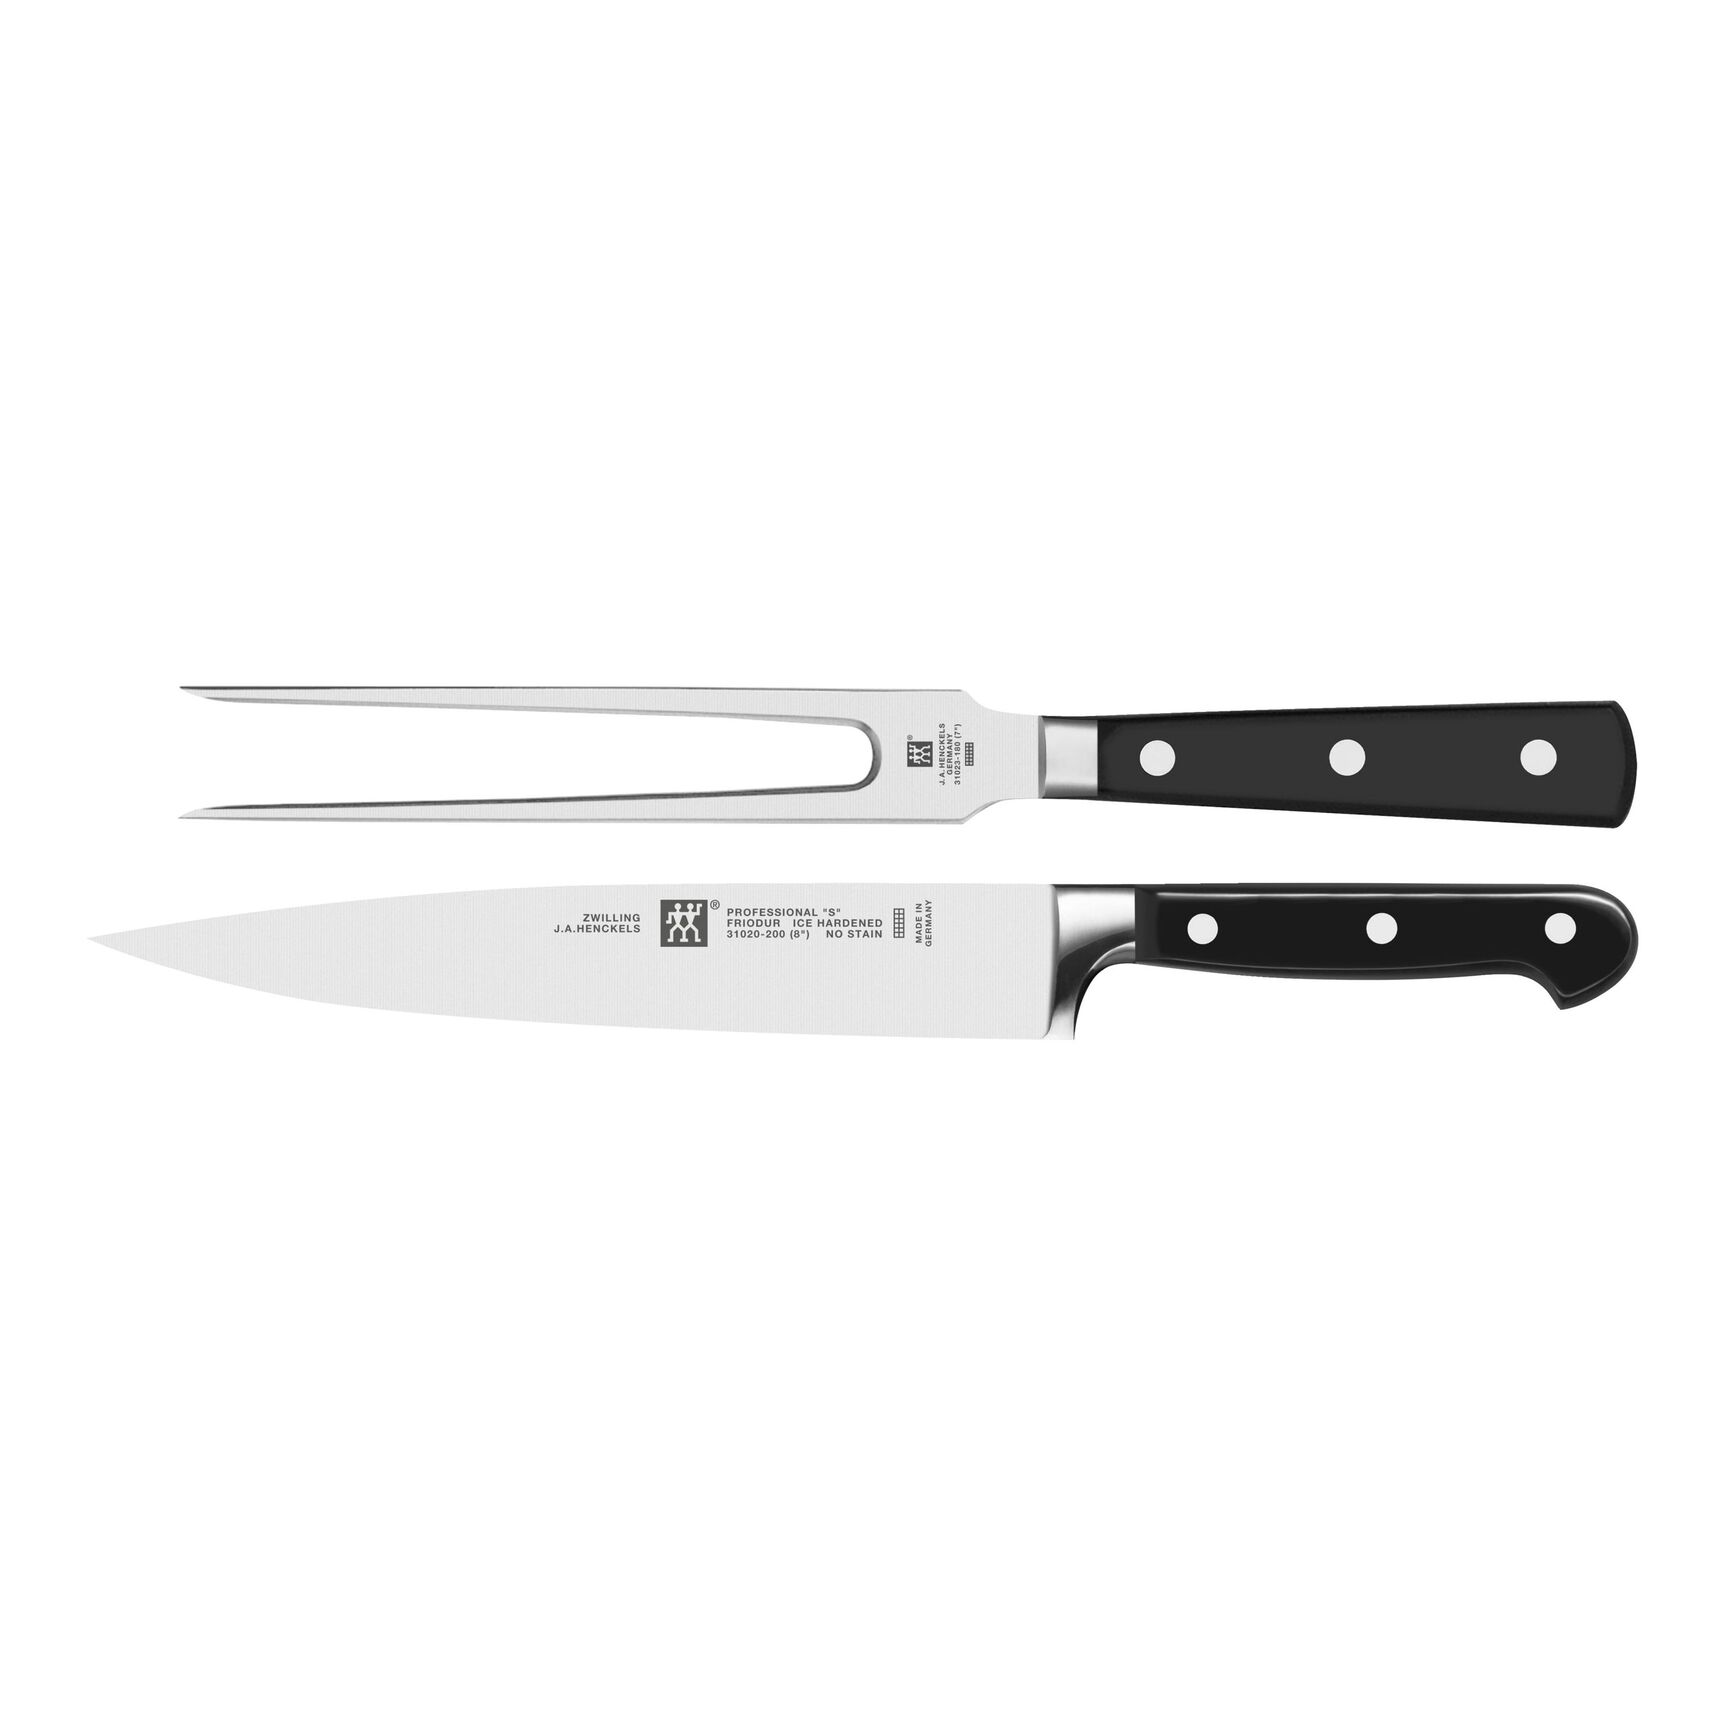 Zwilling Professional S Knife Set 2 Pieces